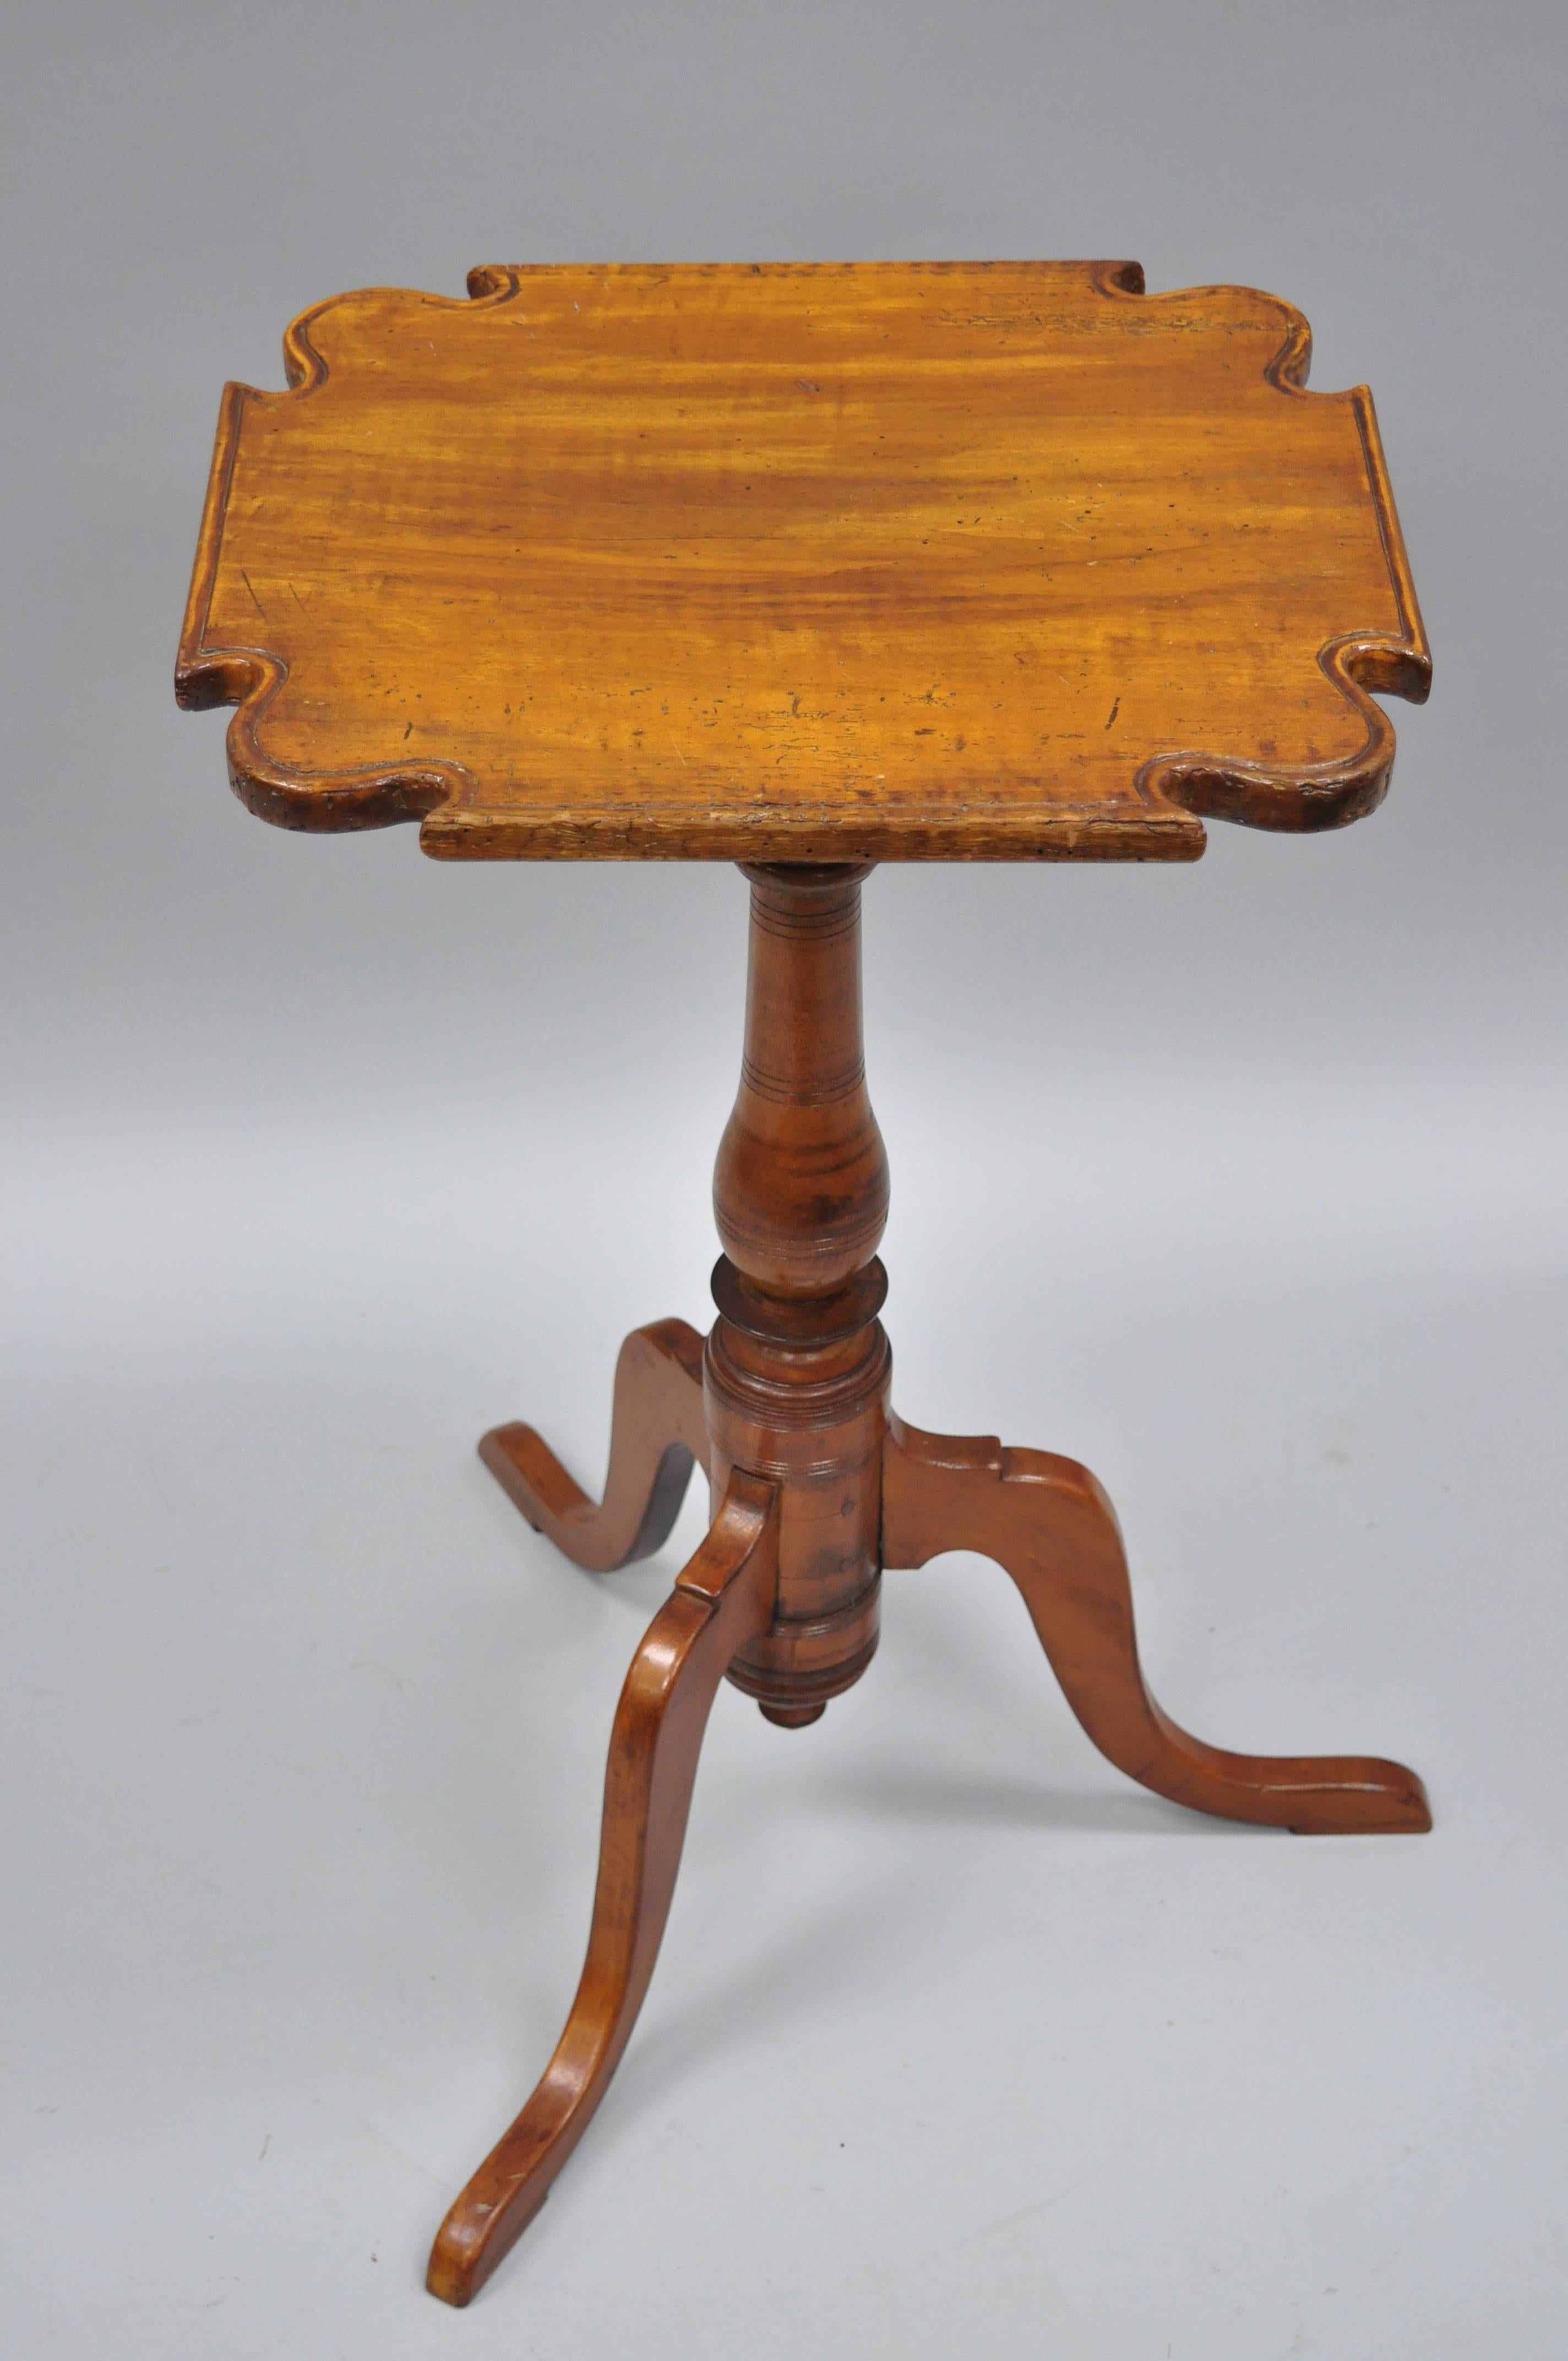 Antique 18th century maple and cheerywood candle stand with tripod pedestal base and scallop carved top. Item features remarkable aged patina and desirable worm holes, tripod base, Queen Anne legs, and carved scallop edge top. Believed to be circa